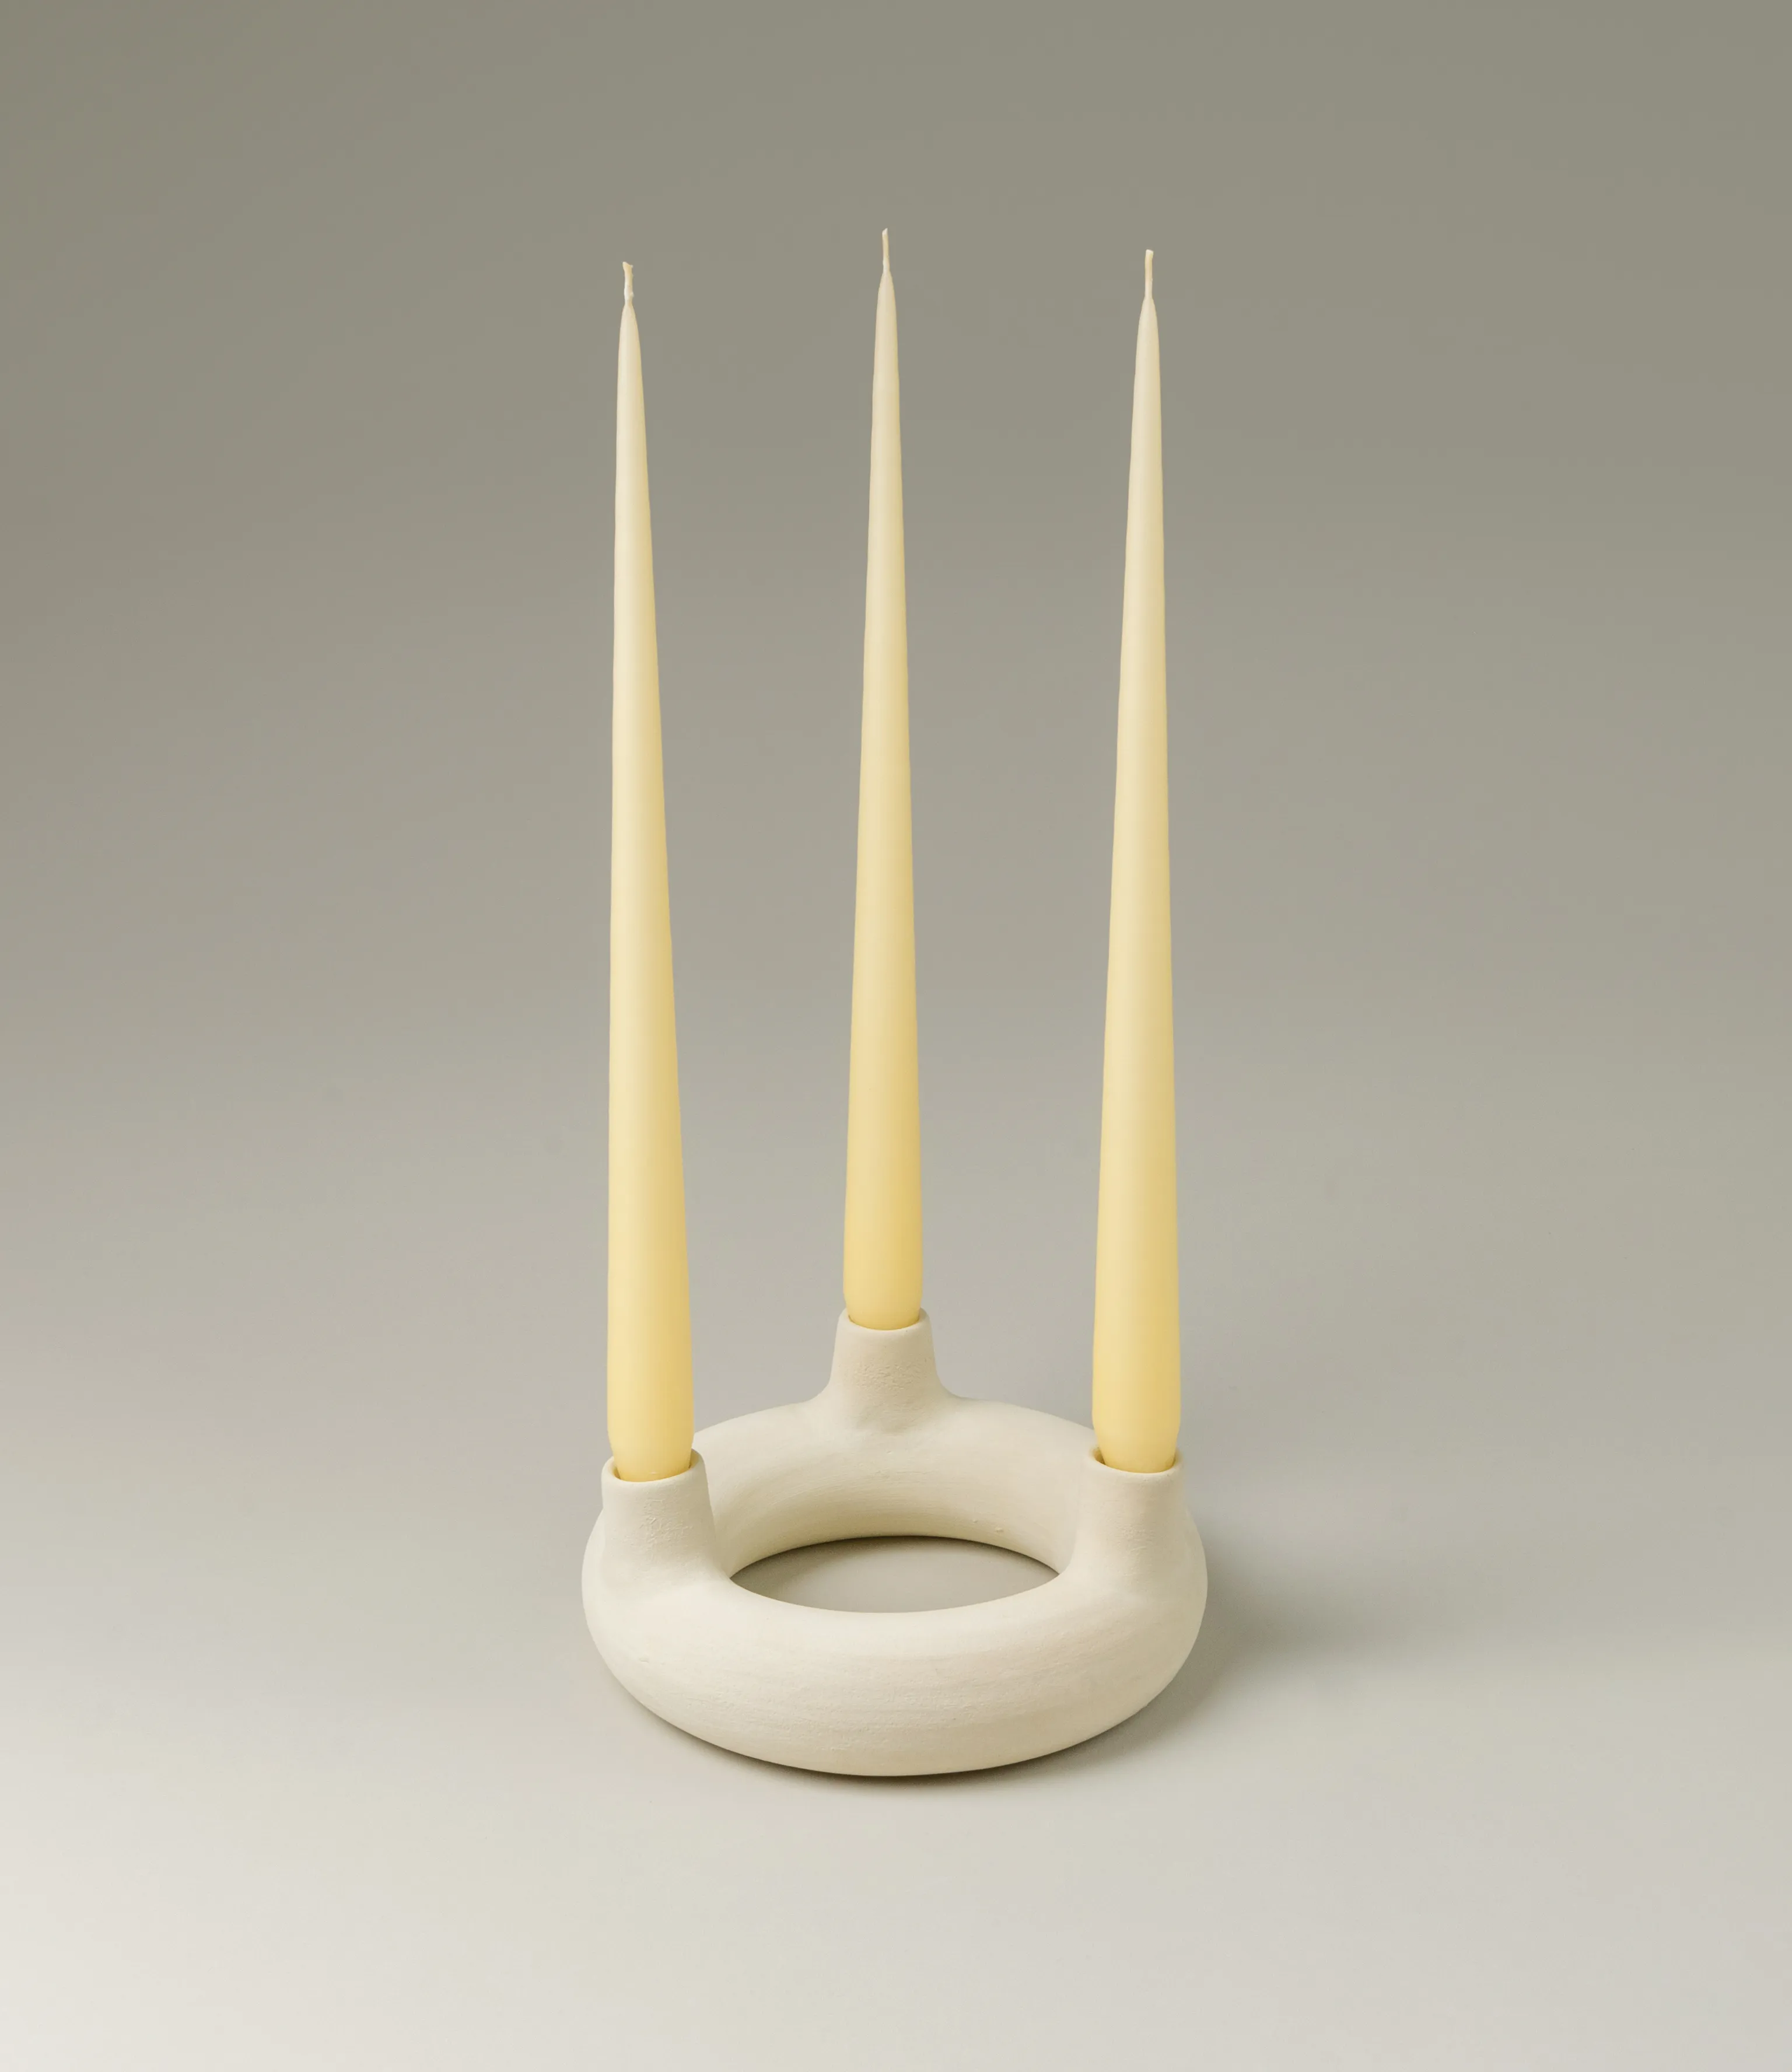 Ester&Erik Taper Candle coming in a buttermilk shade. The product is showcased in use with Rotulis Chandelier Candle Holder from Alfareria La Nava.